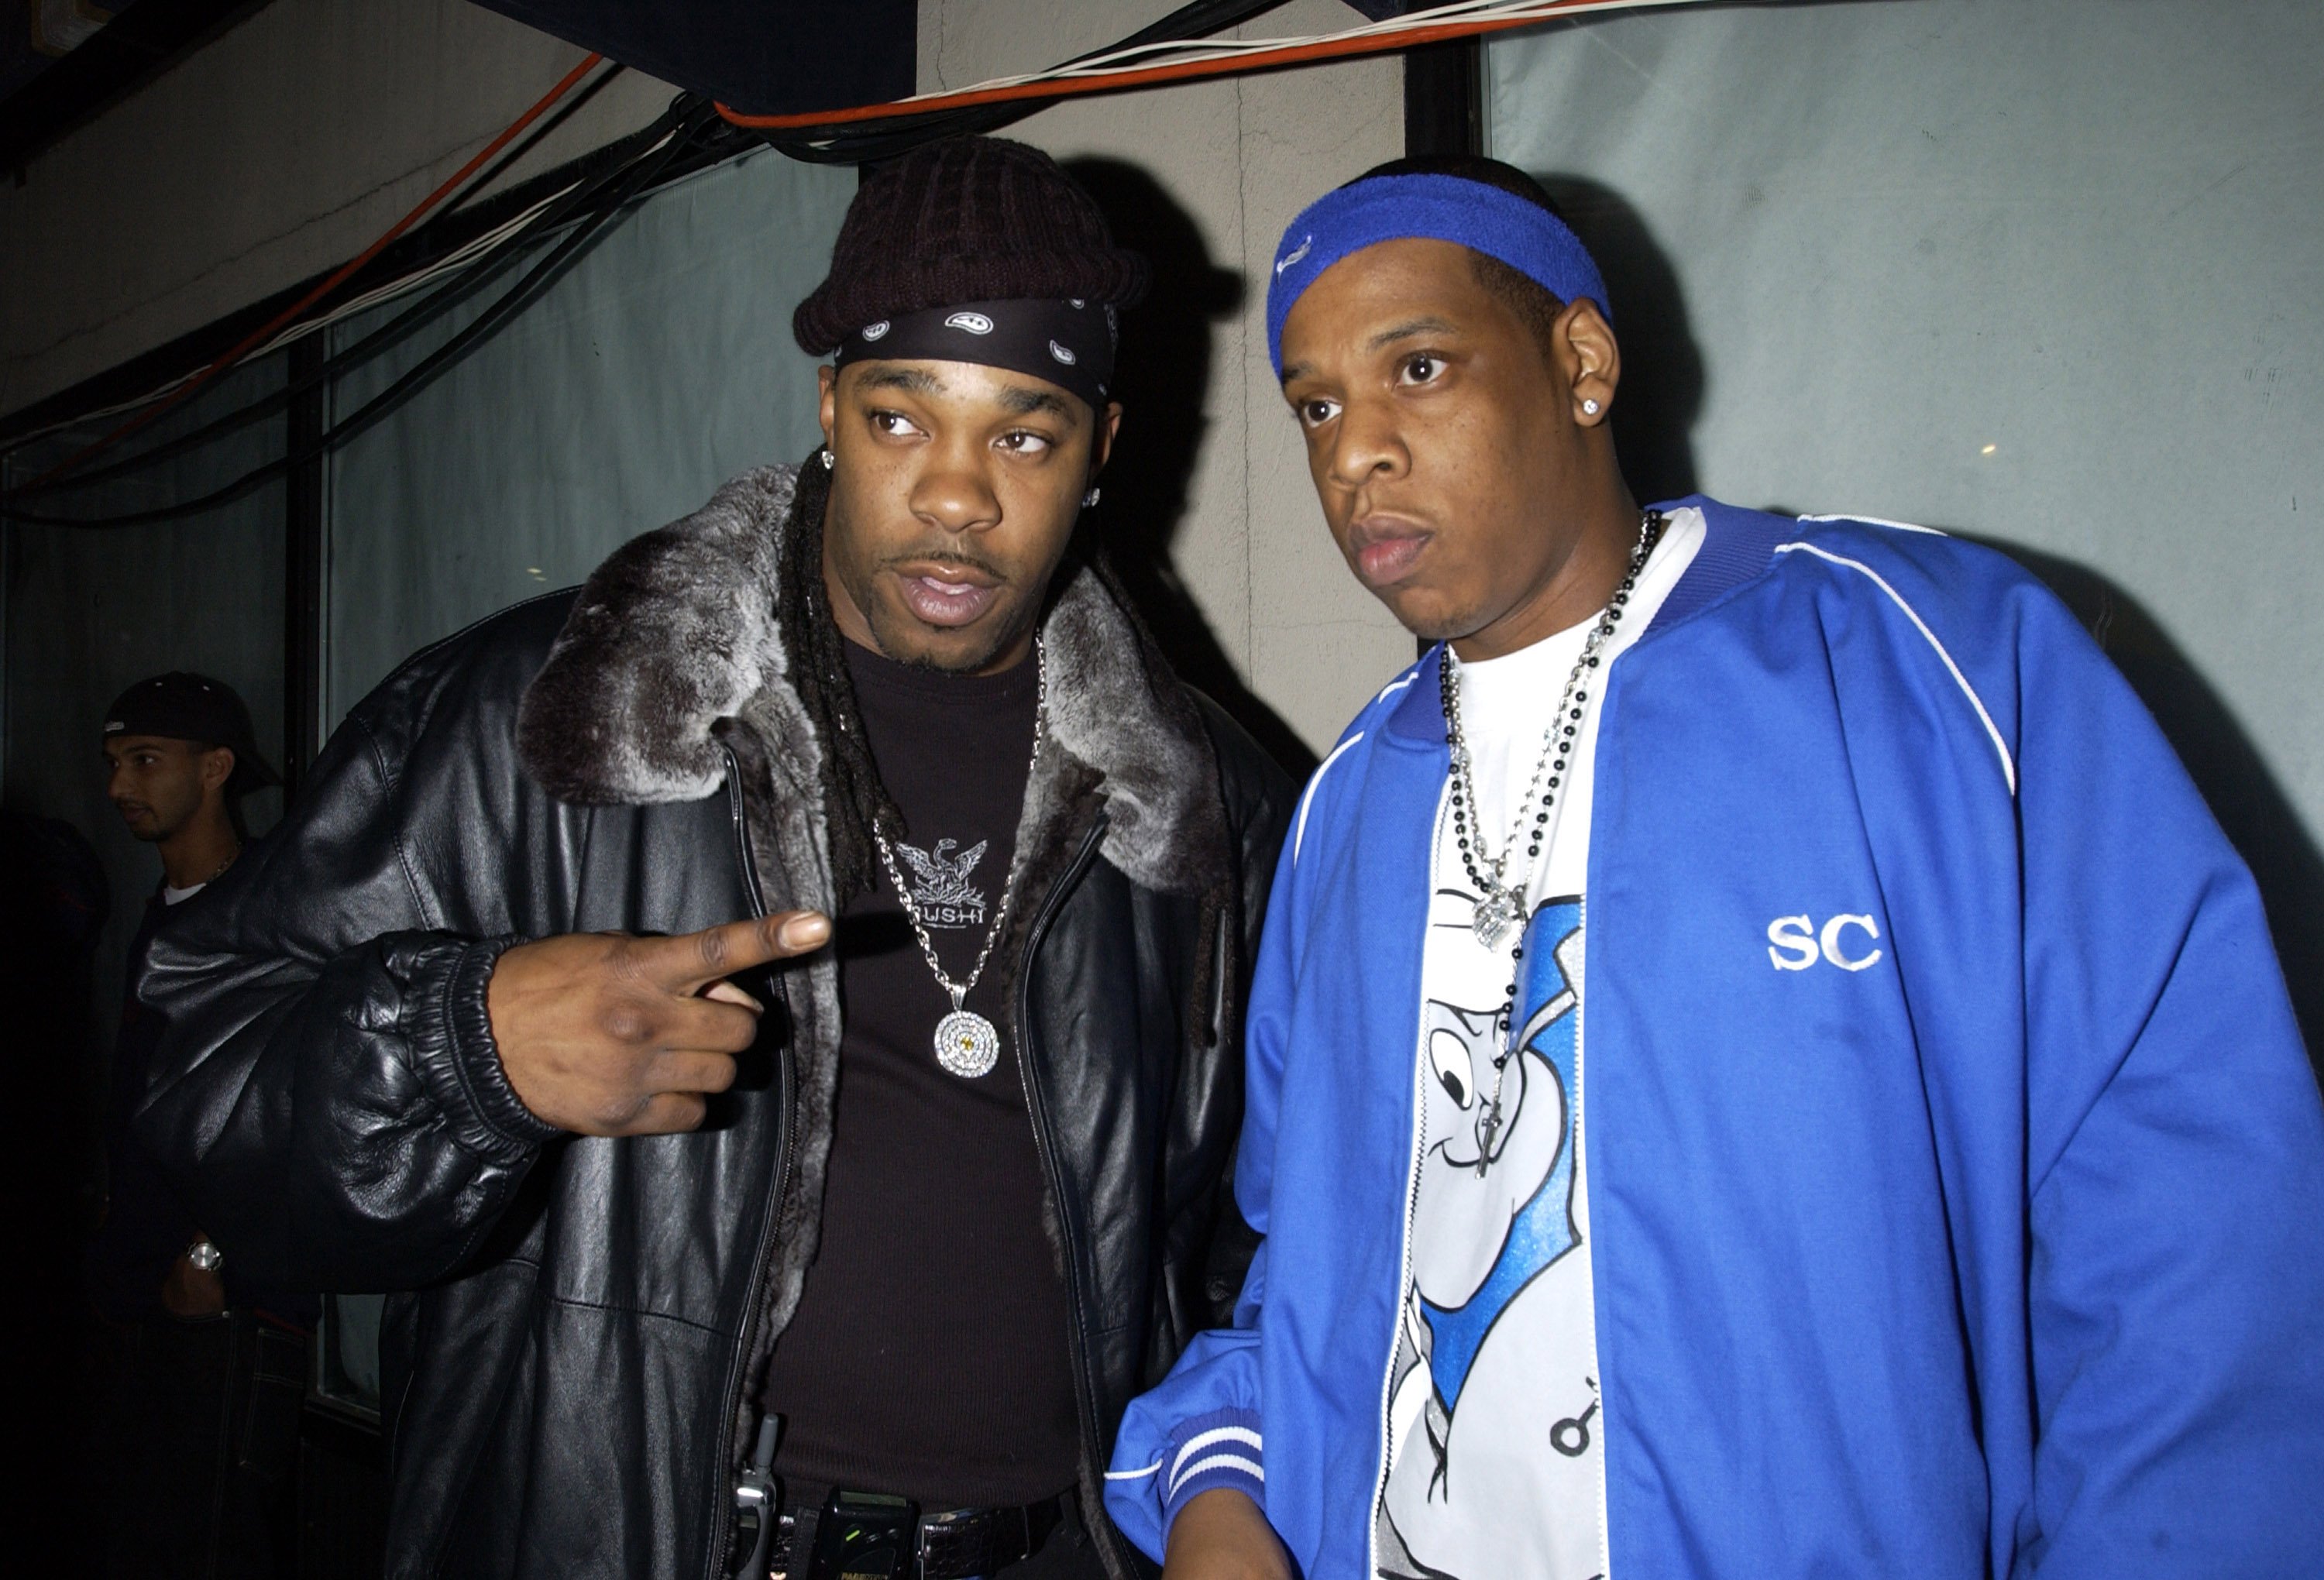 Busta Rhymes and Jay-Z on the red carpet